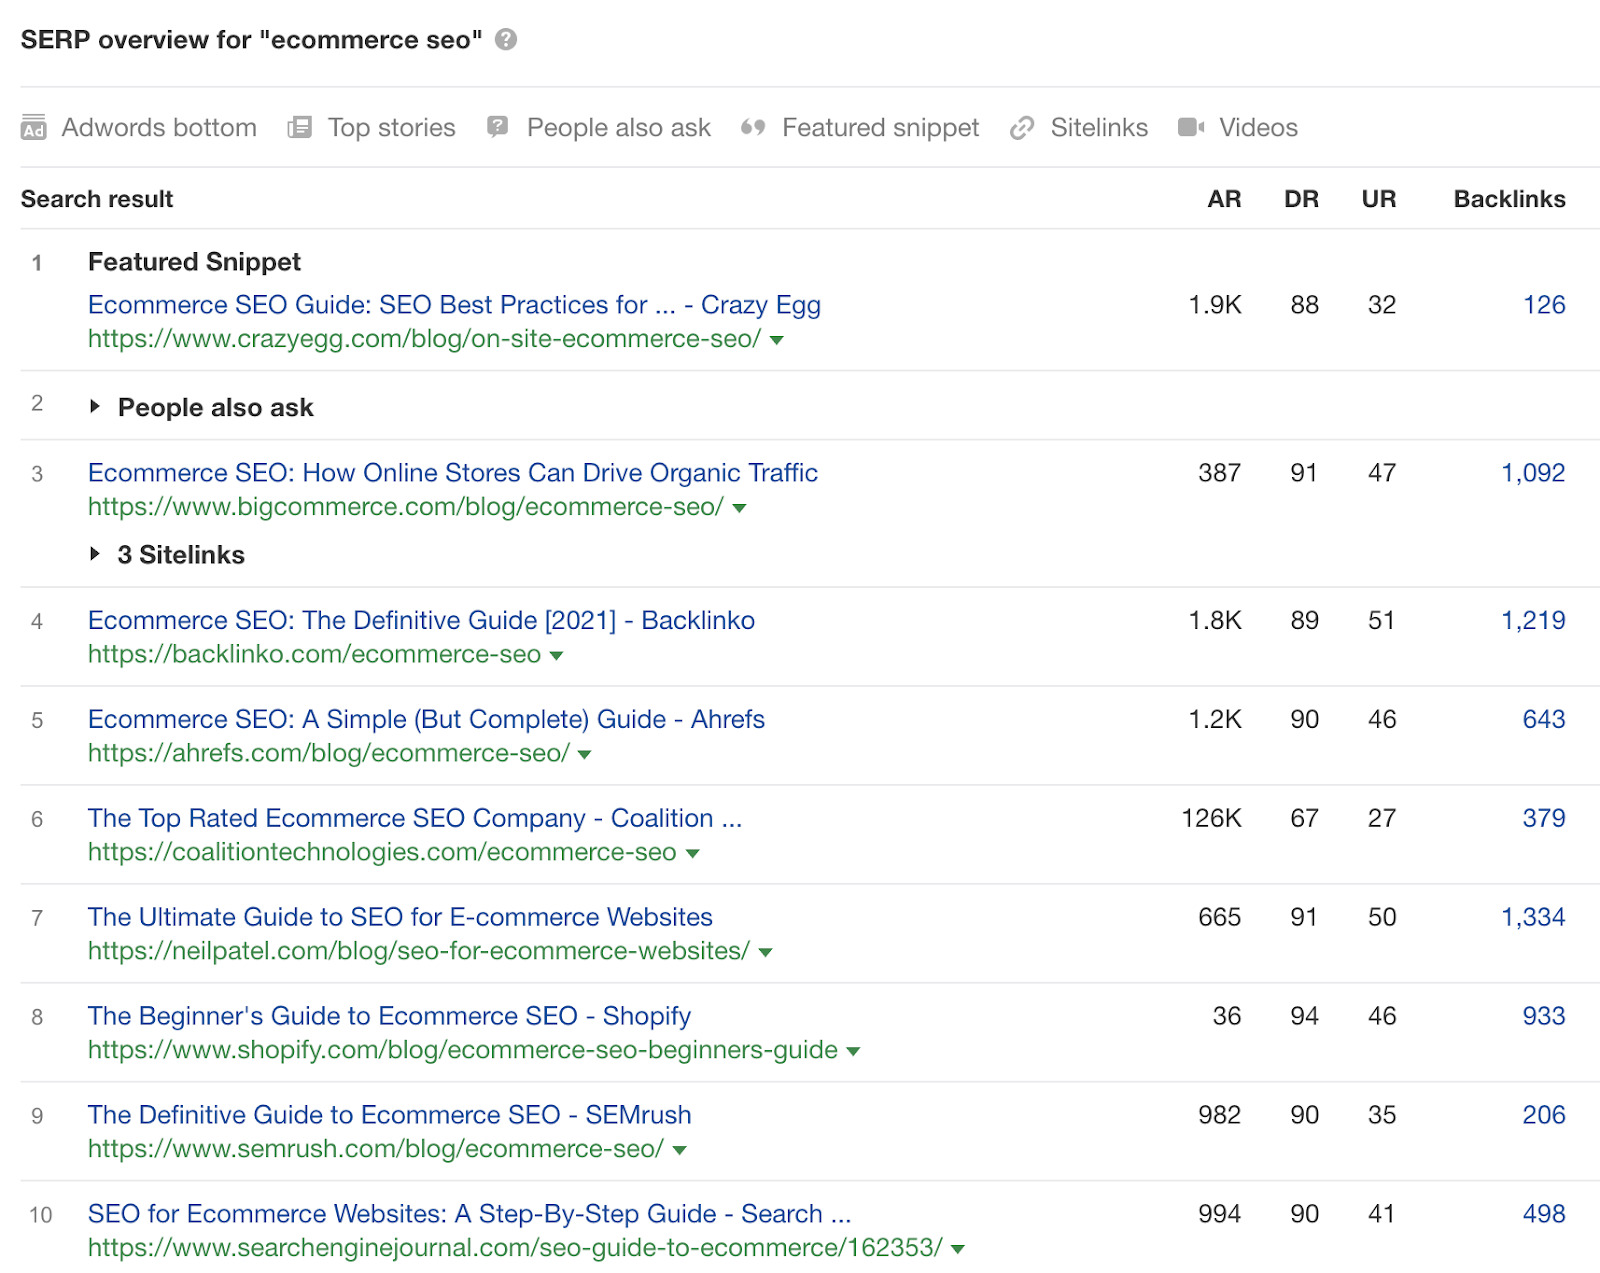 SERP overview for "ecommerce seo"